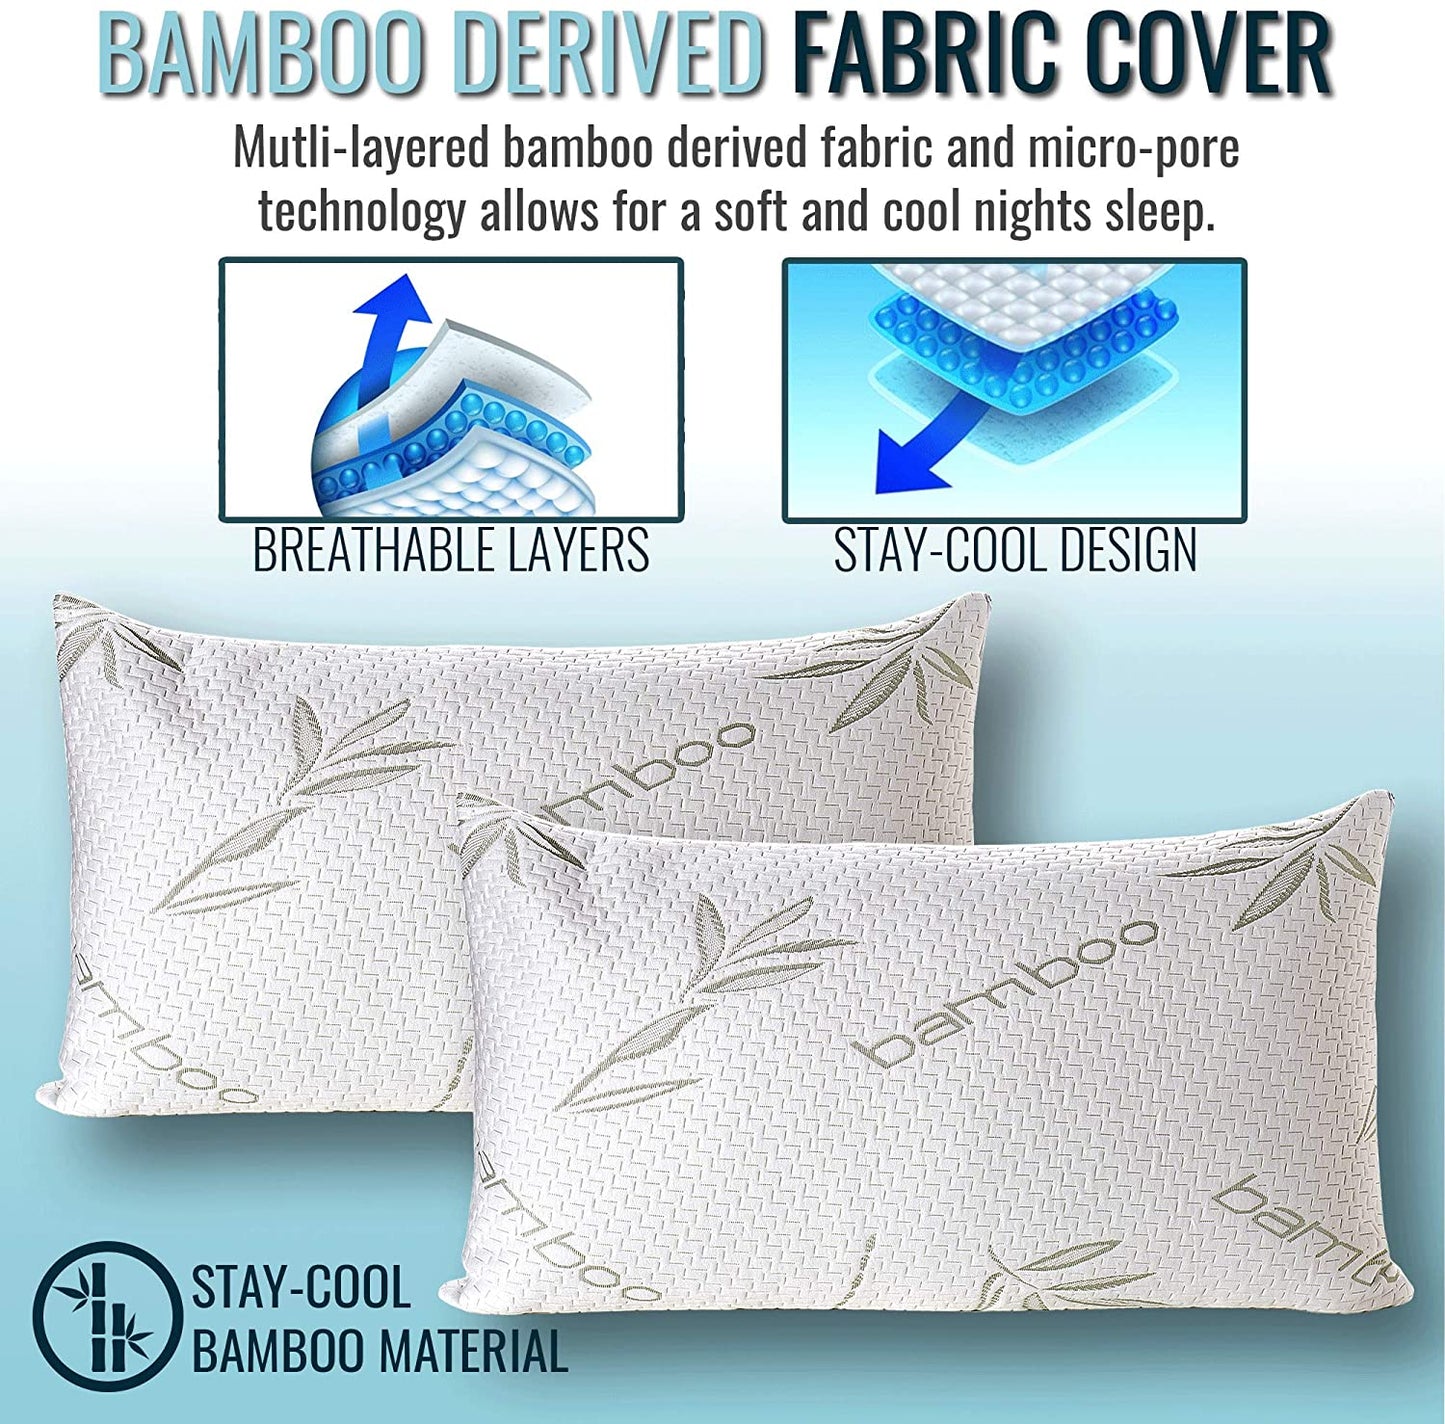 Premium Bamboo Covered Bed Pillow - Ultra-Soft, Hypoallergenic, and Eco-Friendly